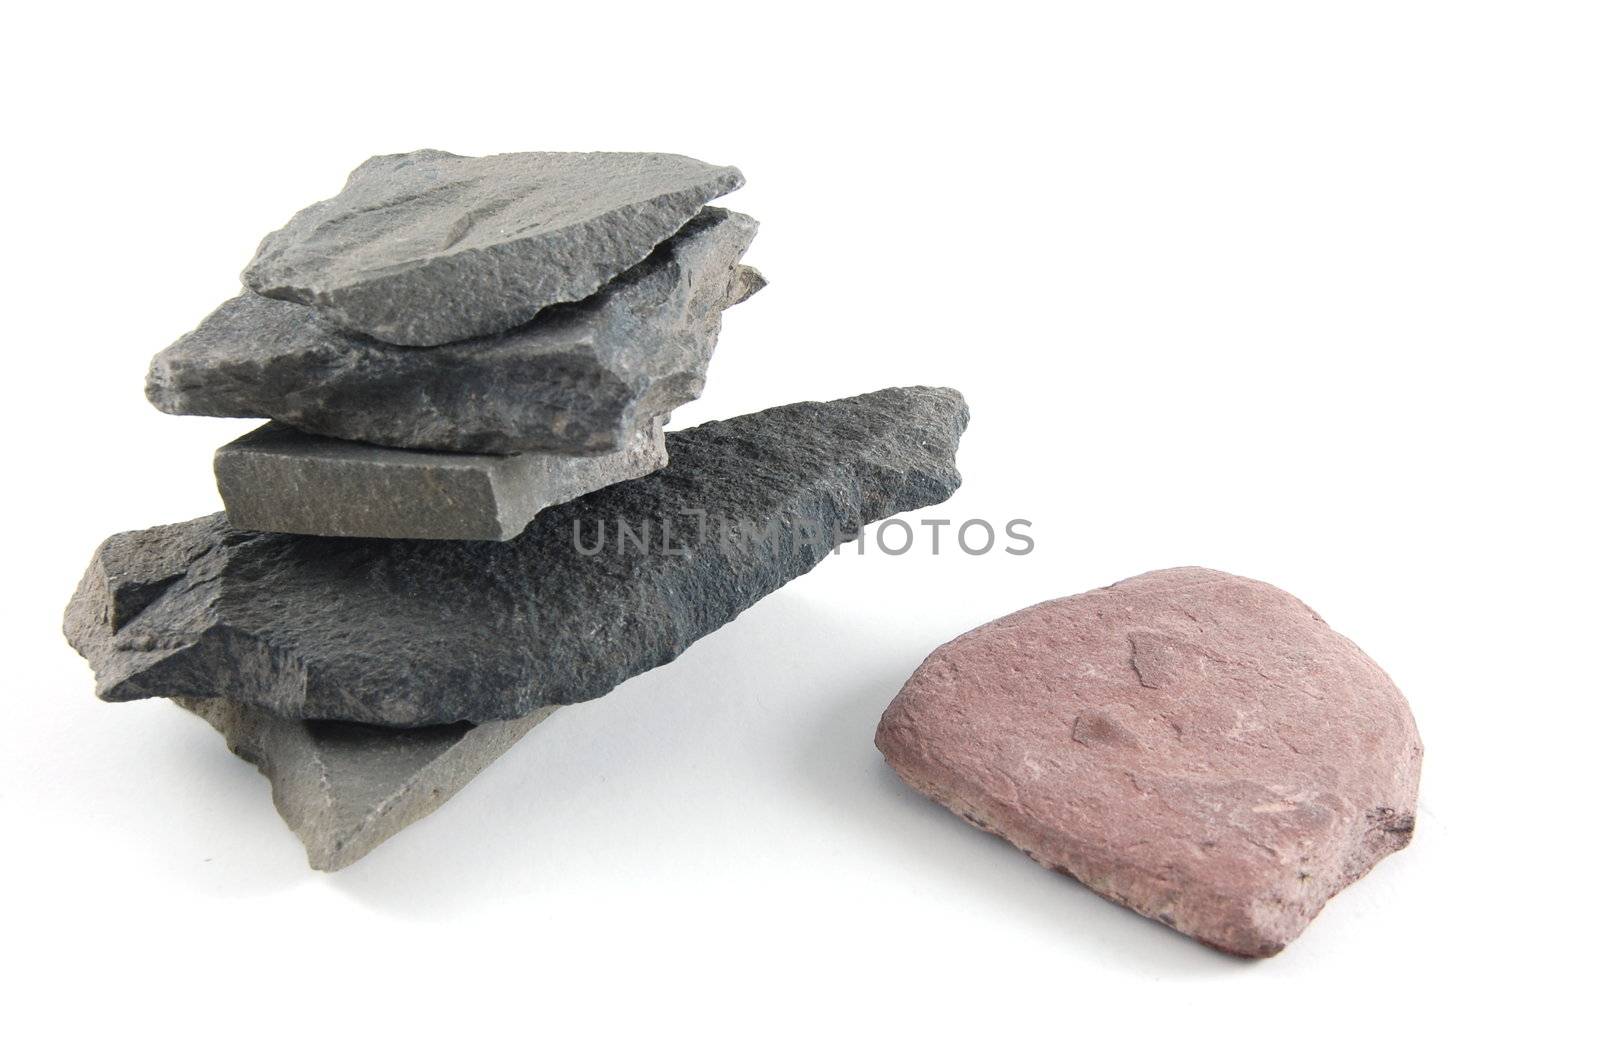 A tower made of stones isolated on a white background.